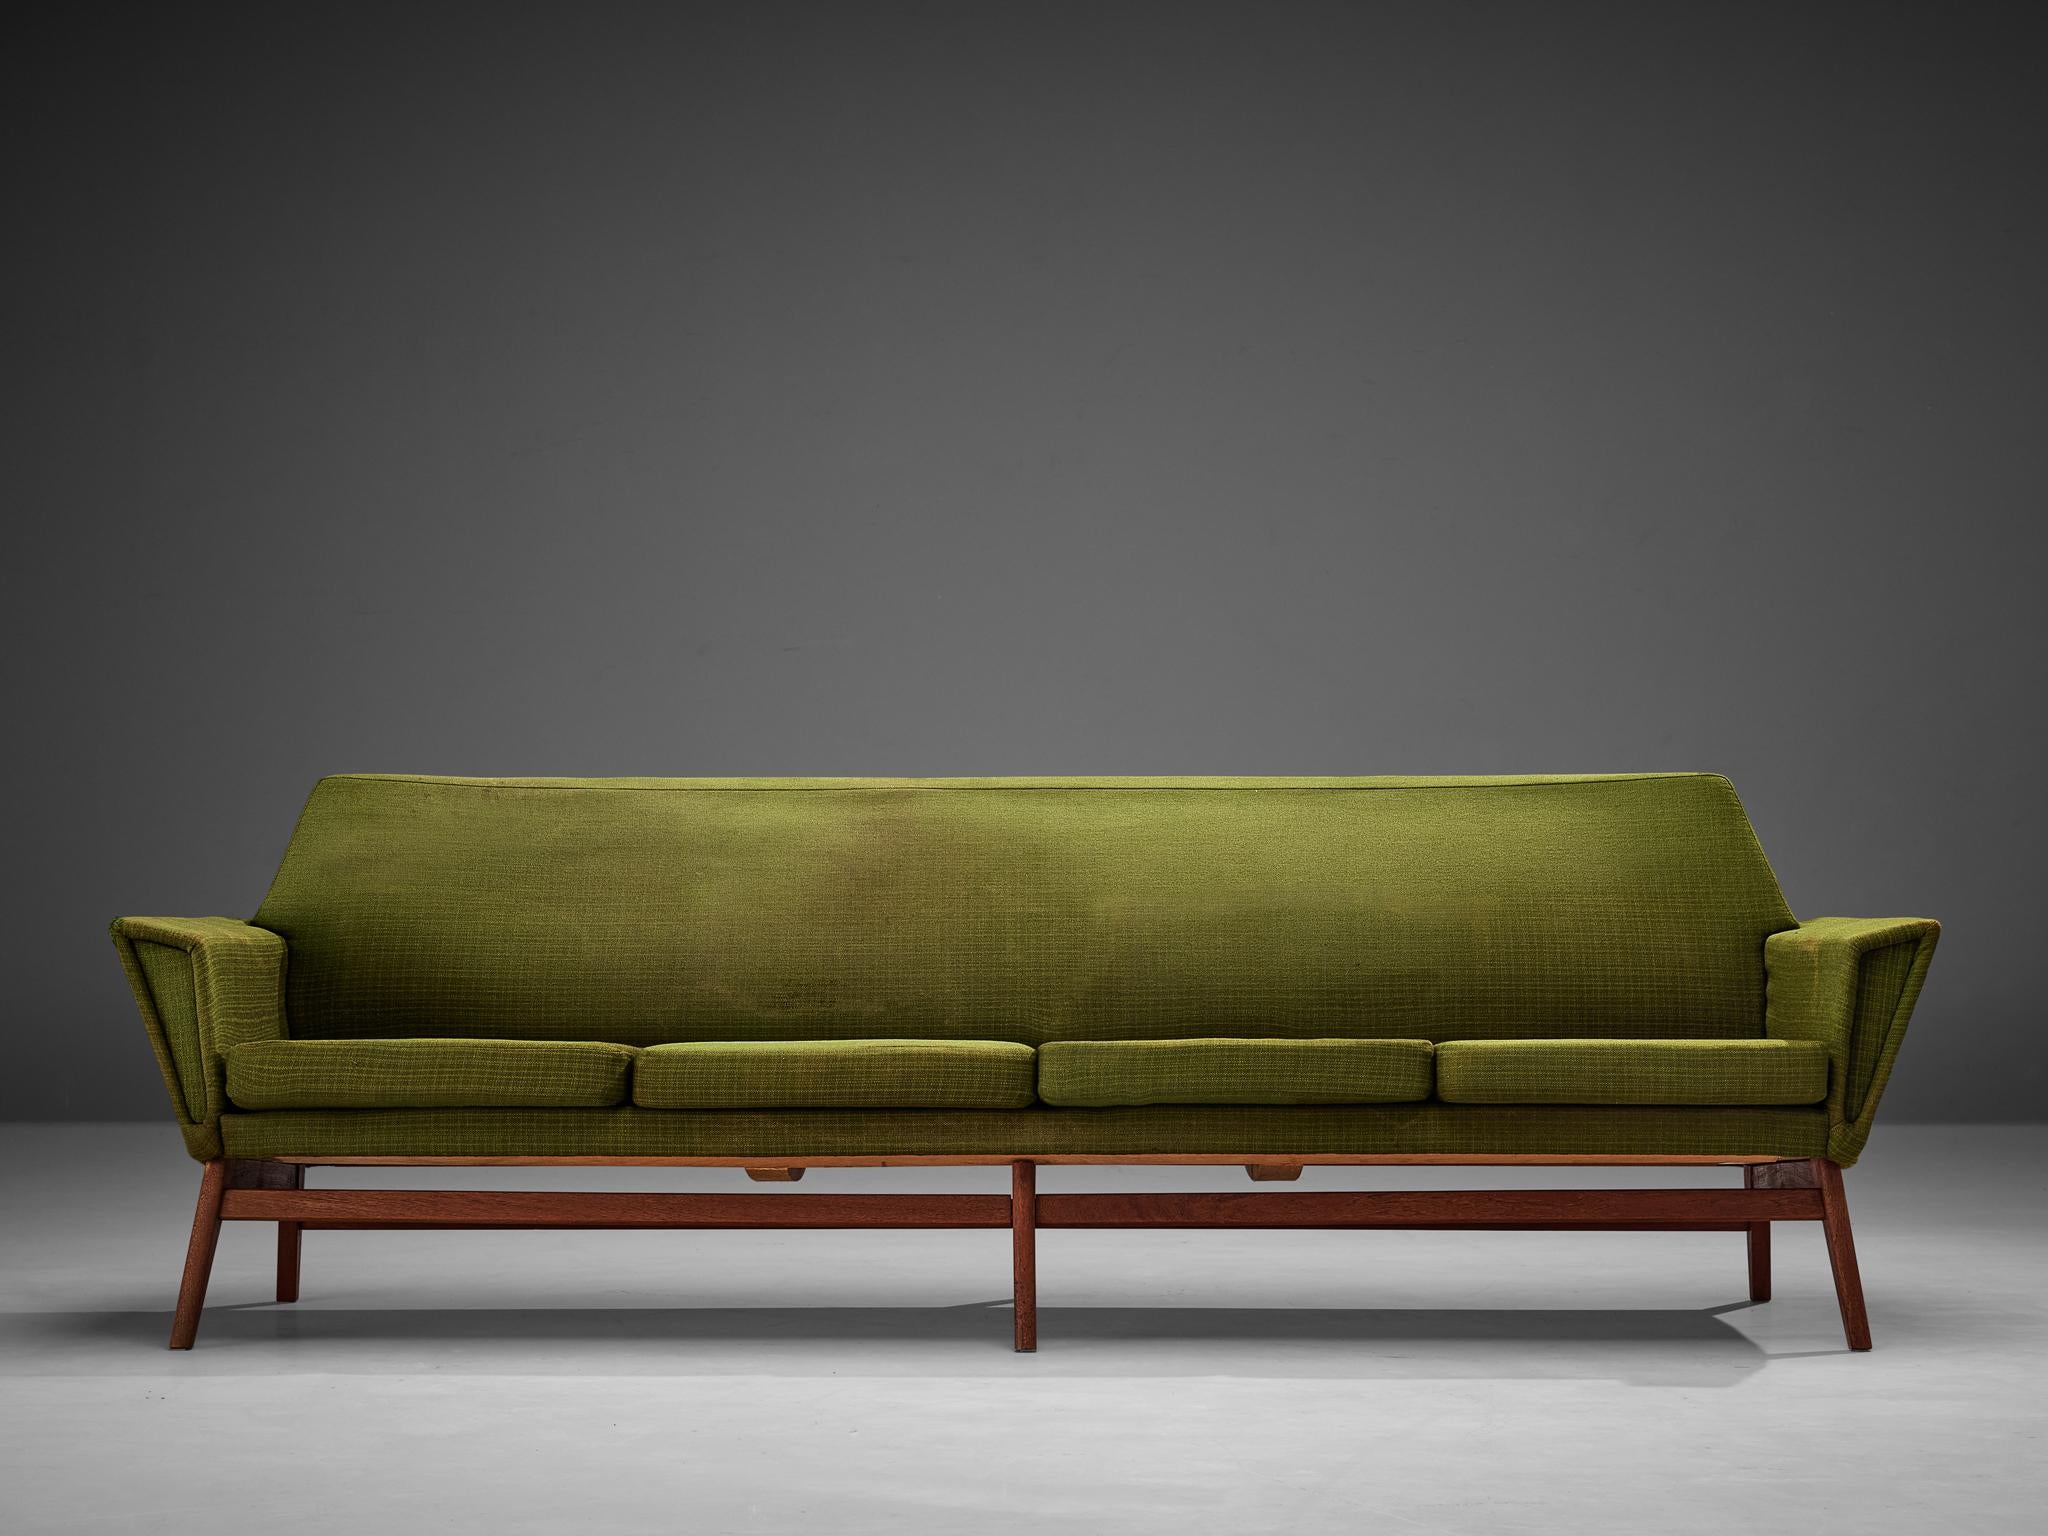 Sofa, teak, fabric, Denmark, 1950s

Typical Scandinavian Modern sofa with modest yet striking lines. The triangular silhouette of the armrests underlines the modern dimensions of this sofa. The majestic construction is clearly visible in the frame,